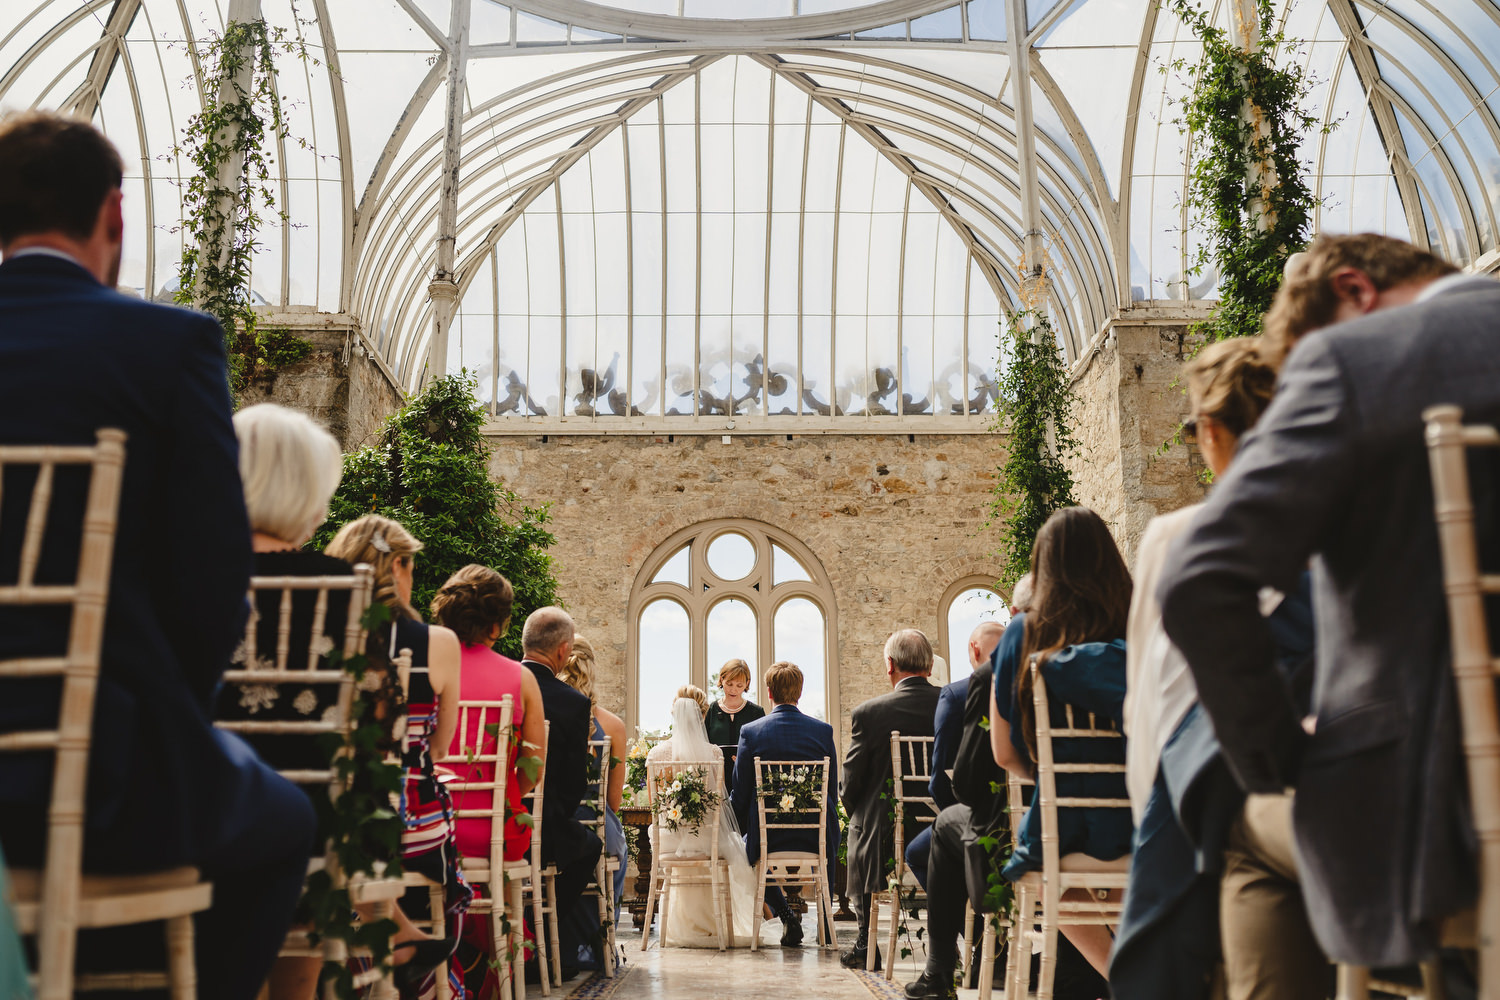 Couple and celebrant during their wedding ceremony at The Orangery at Killruddery House, Co. Wicklow